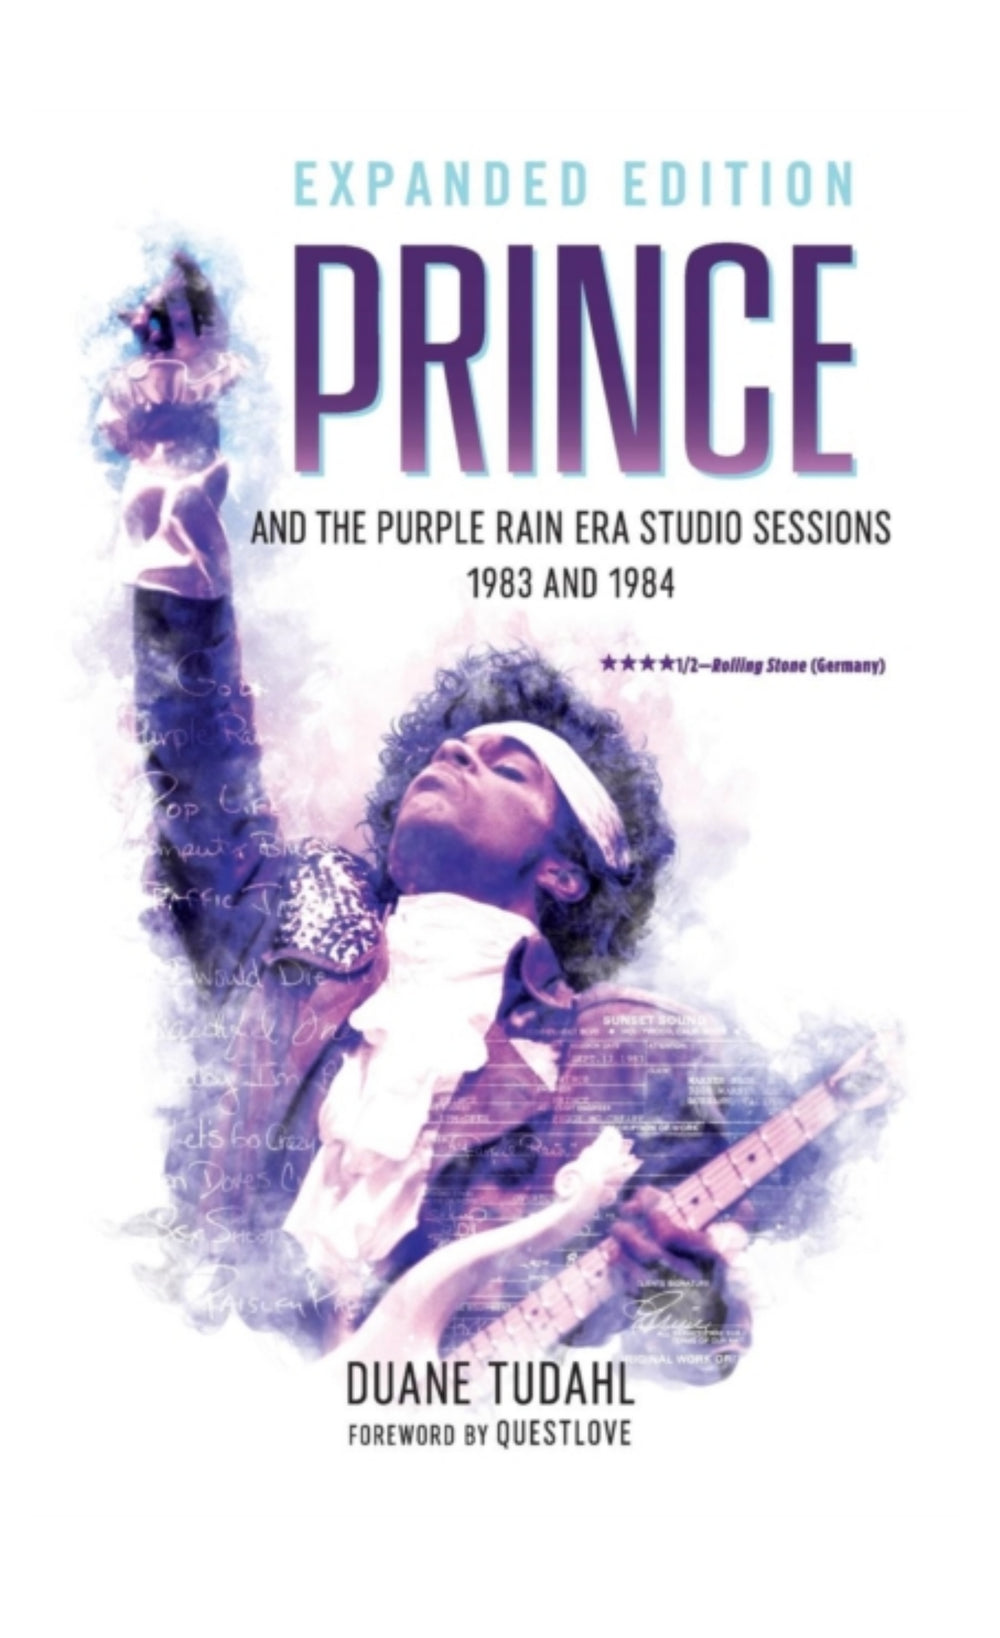 Prince and the Purple Rain Era Studio Sessions : 1983 and 1984 by Duane Tudahl Book Brand New